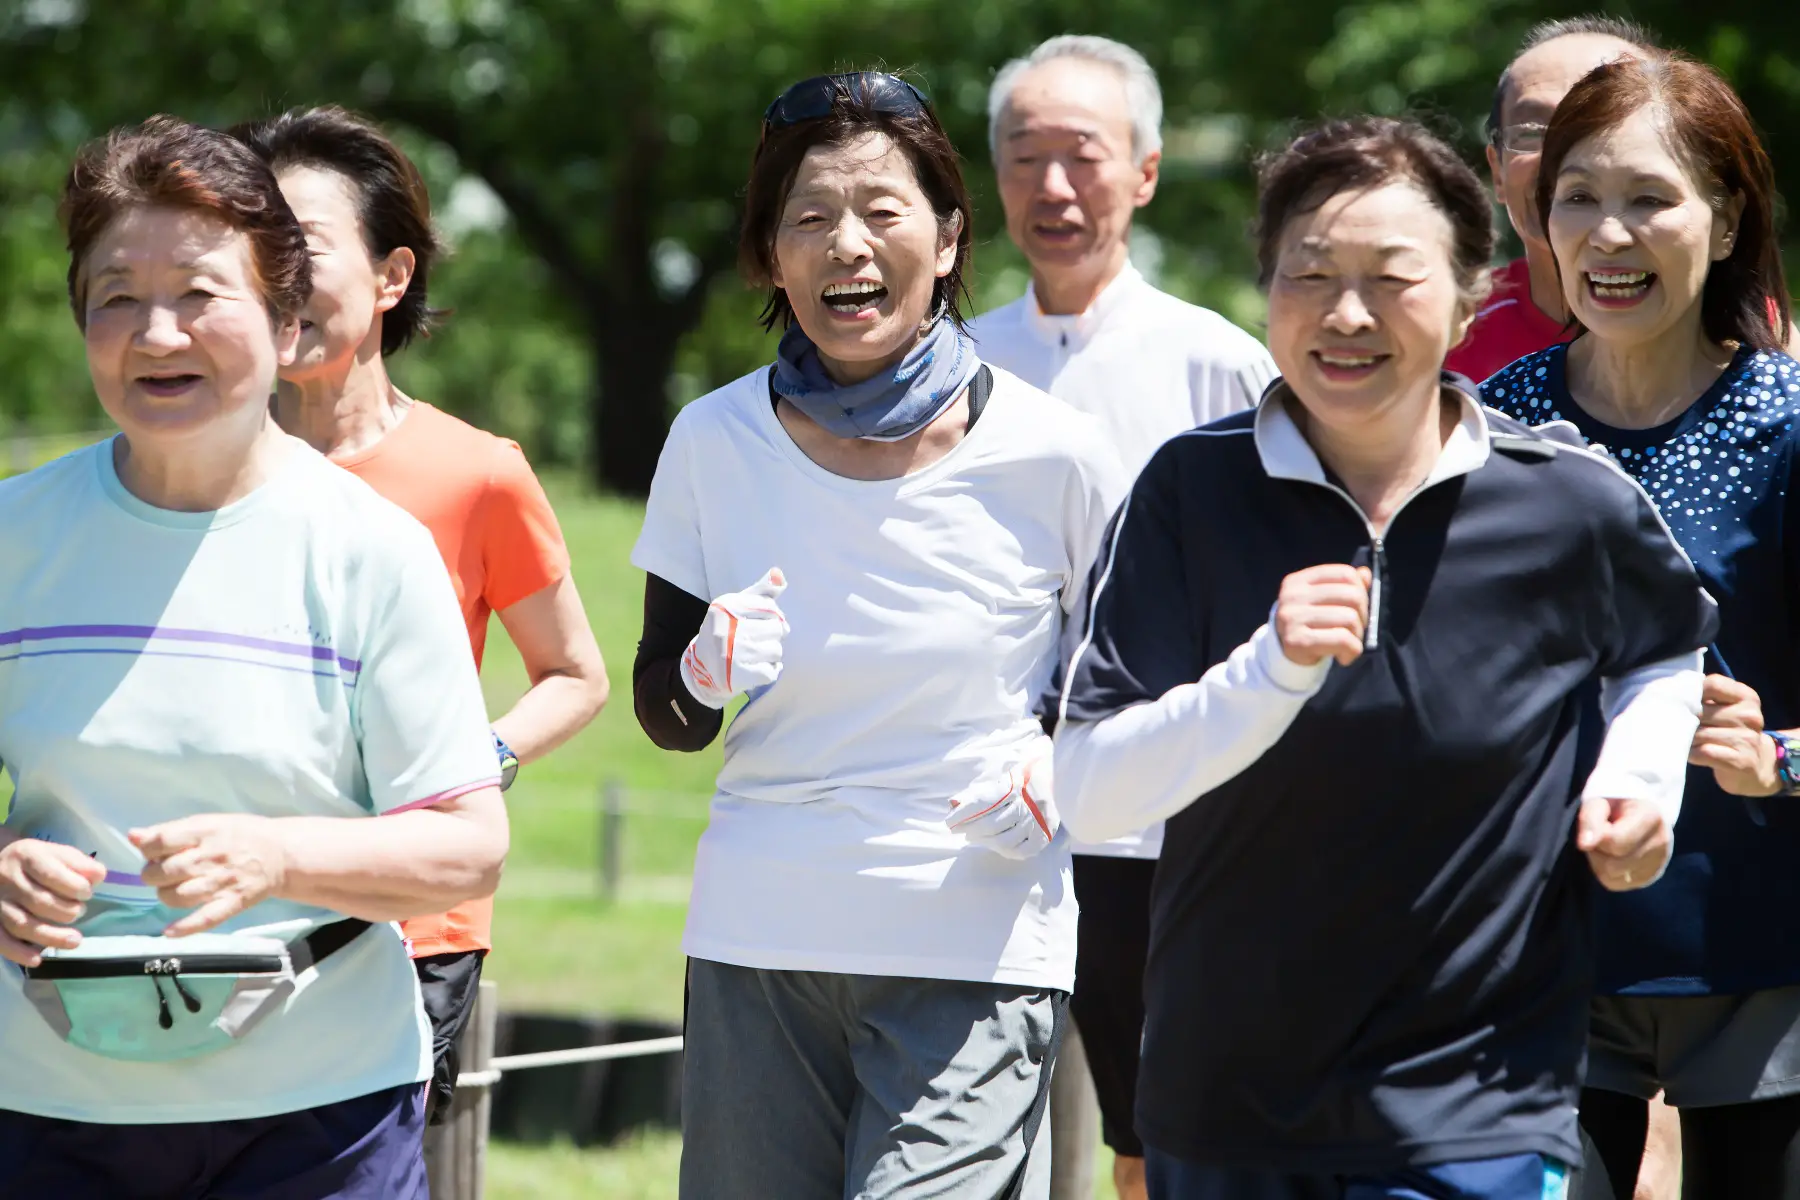 a group of happy and healthy seniors going for a jog together in a park on a sunny day